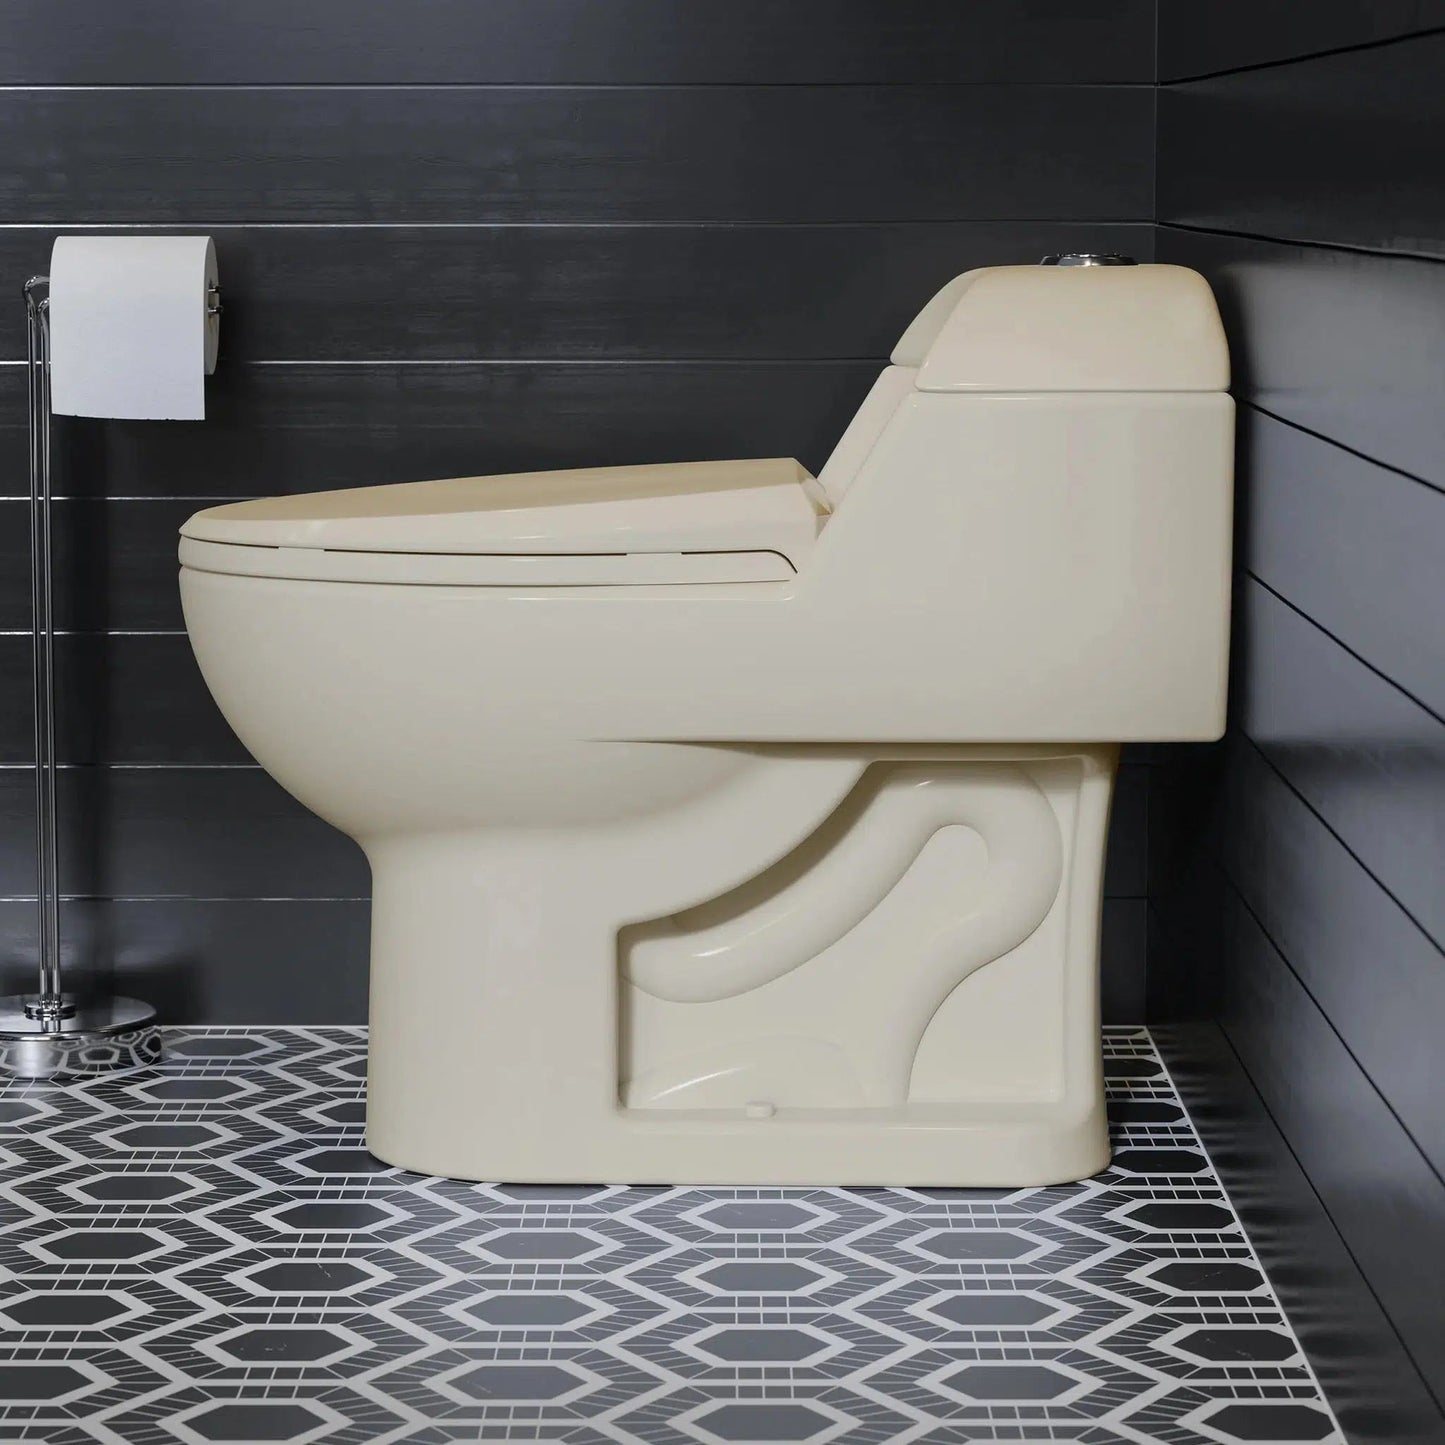 Swiss Madison Château 16" x 24" One-Piece Bisque Elongated Floor-Mounted Toilet With 1.1/1.6 GPF